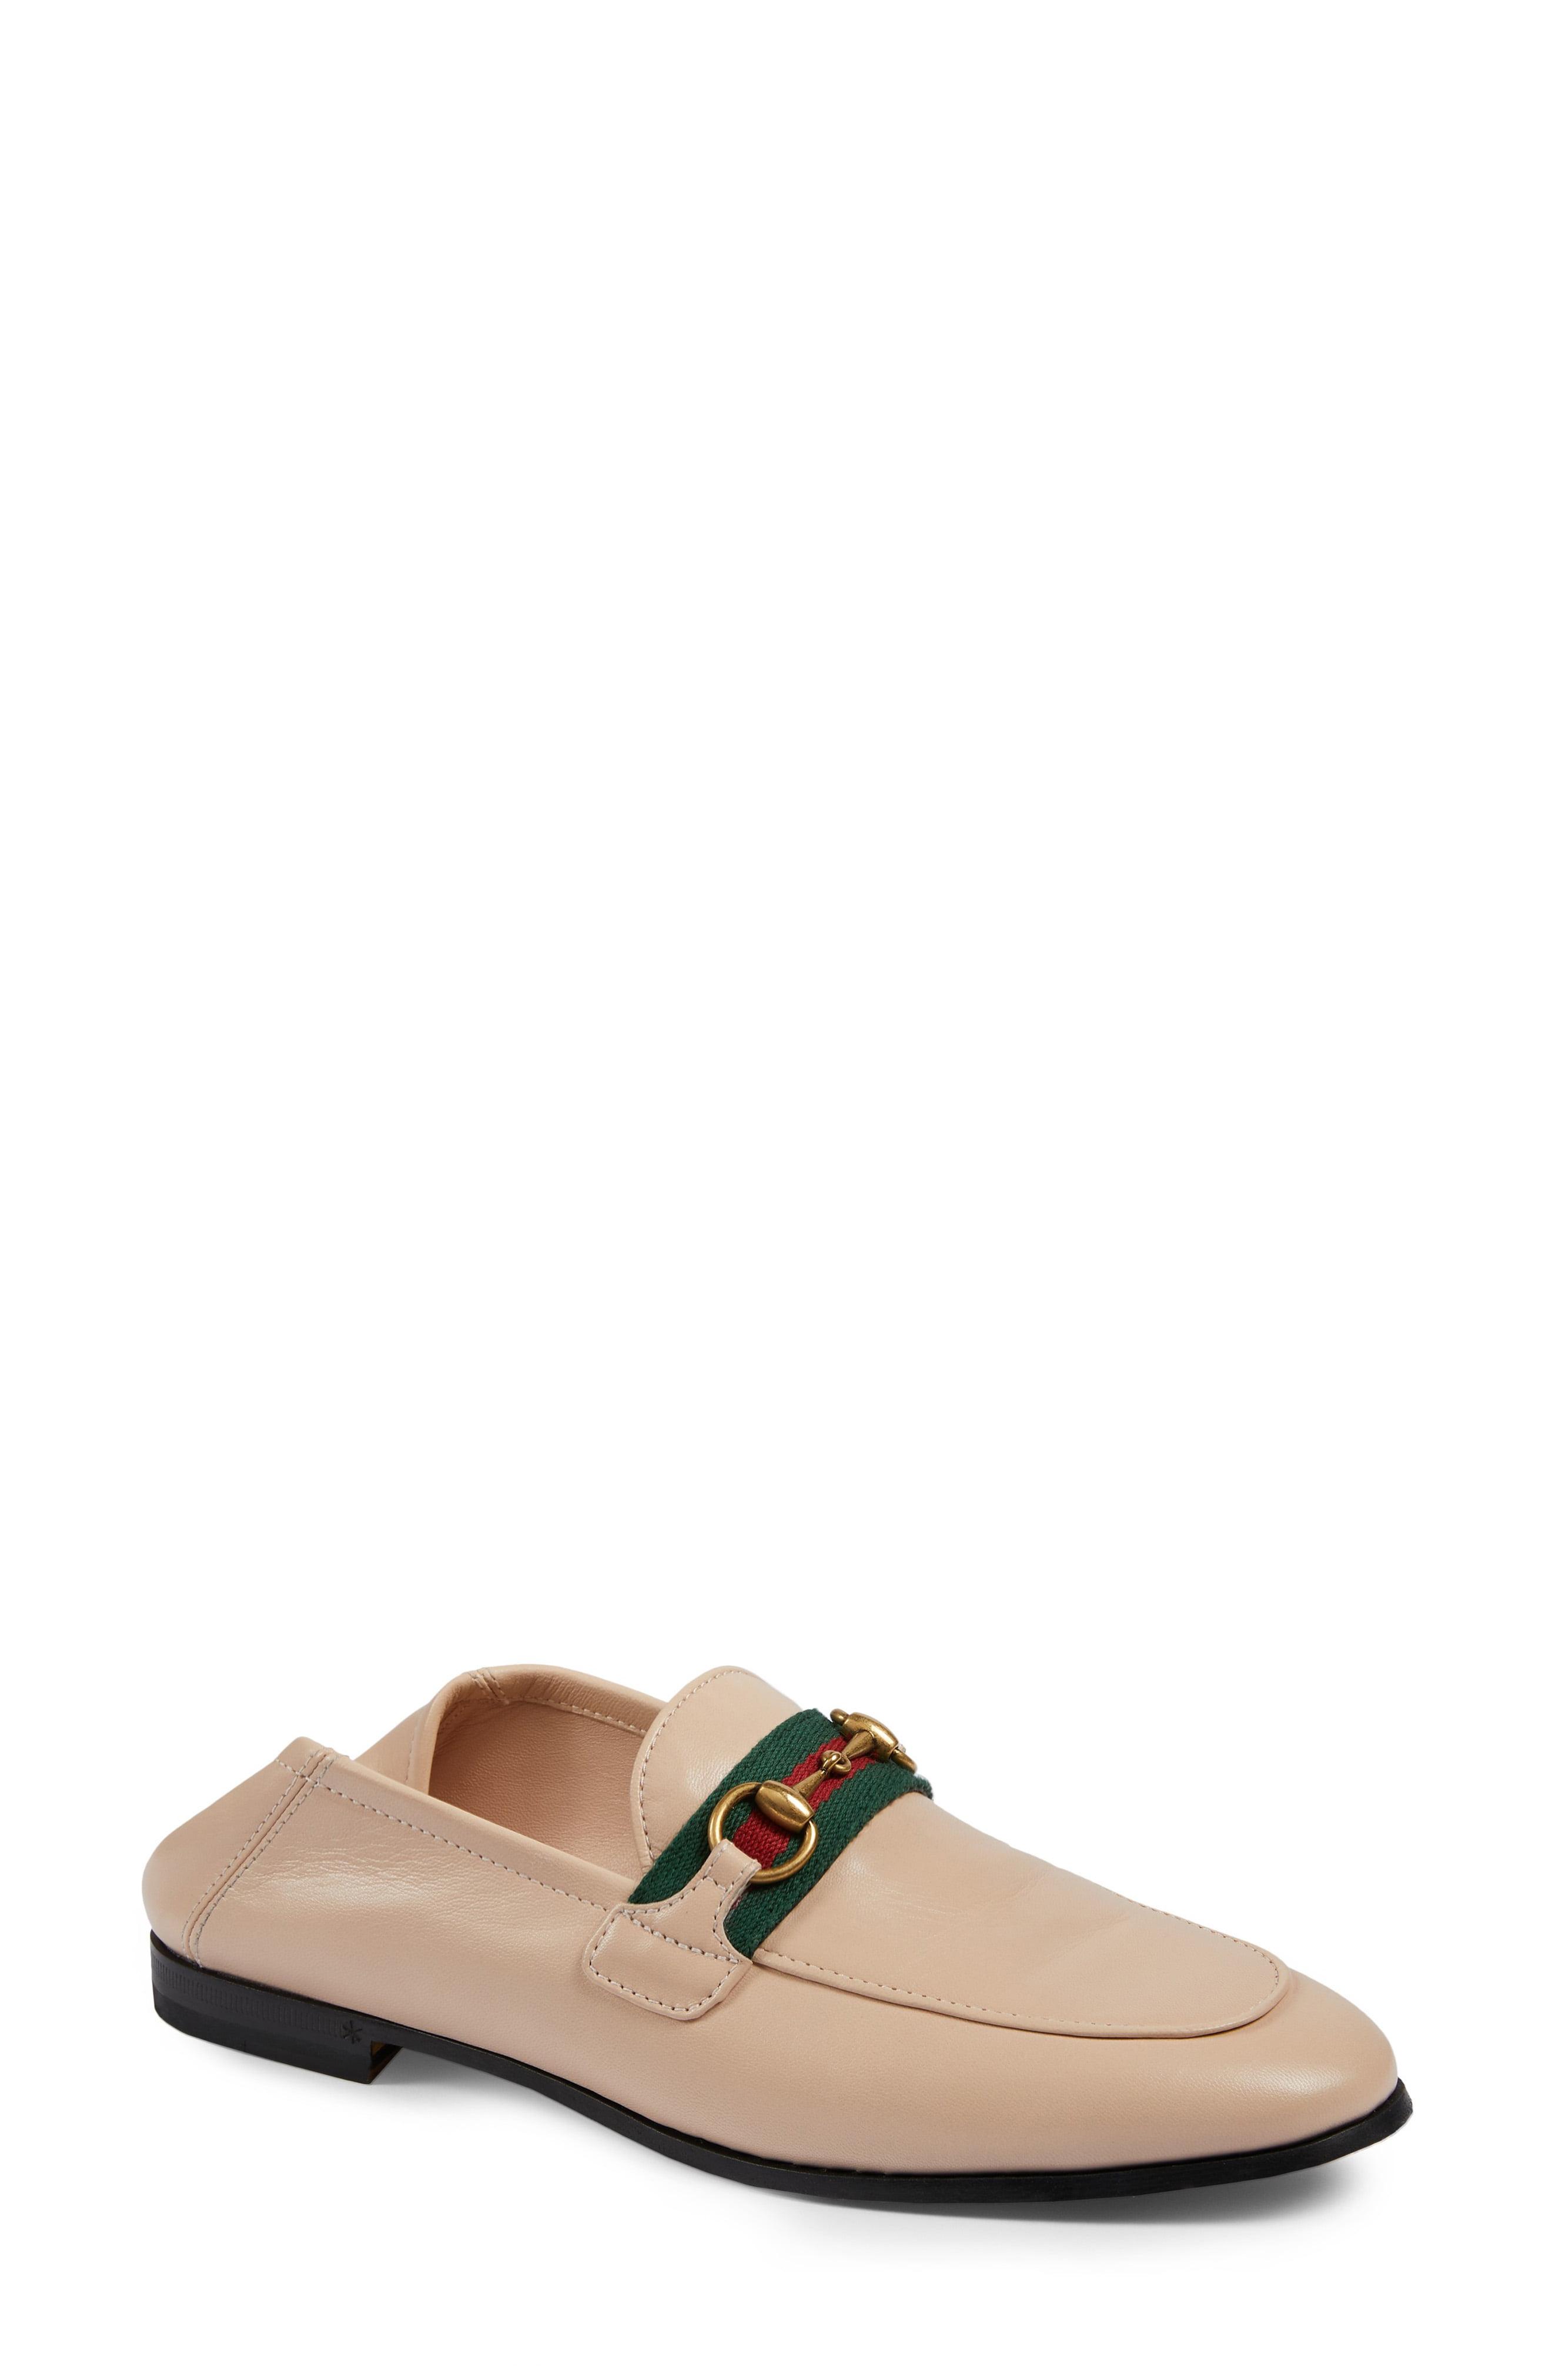 gucci brixton convertible loafer